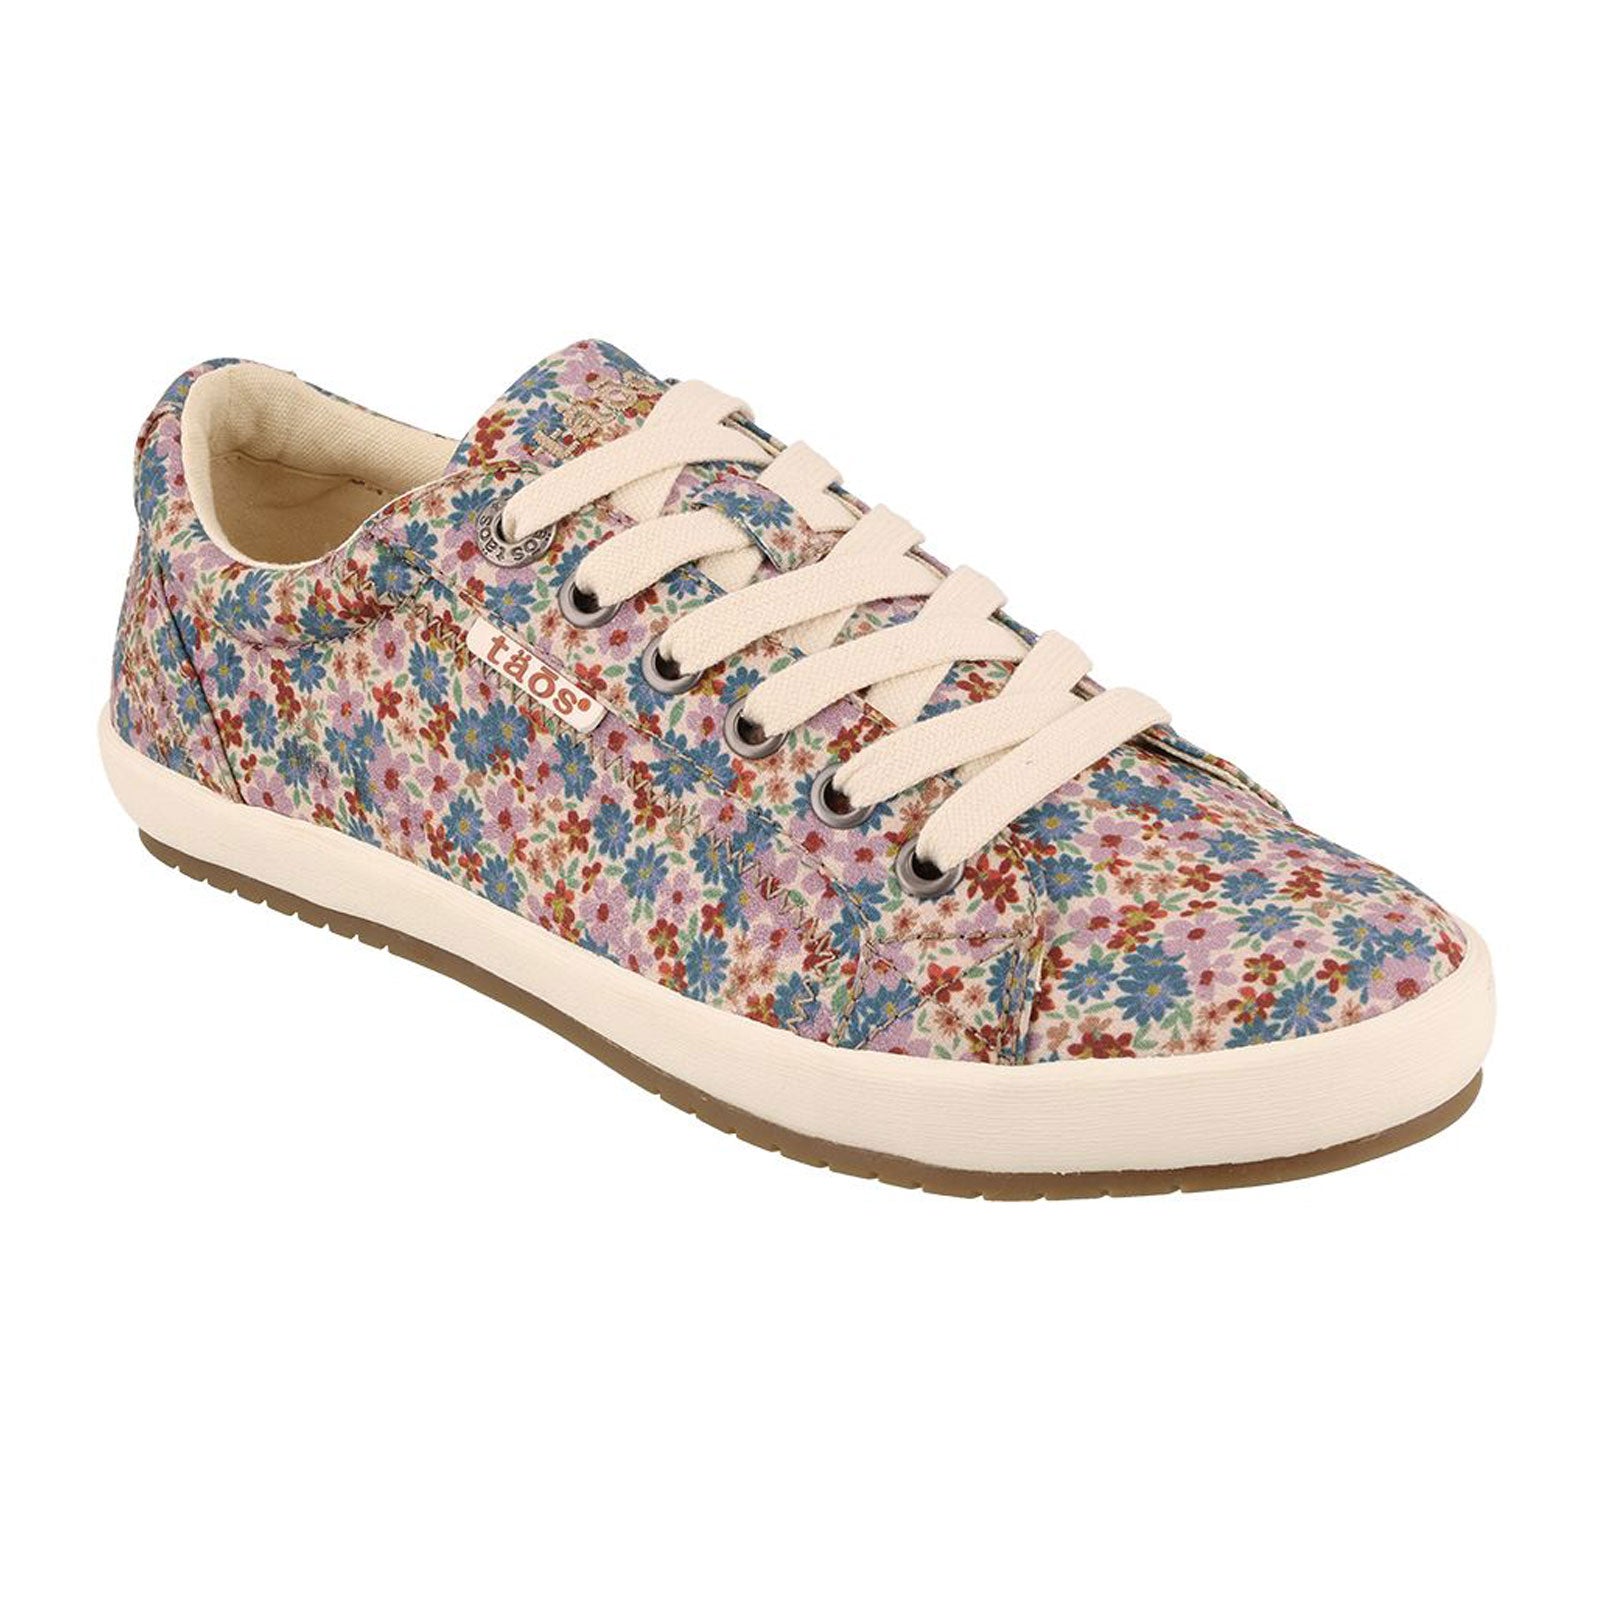 Guess Women's Floral Sneakers | eBay